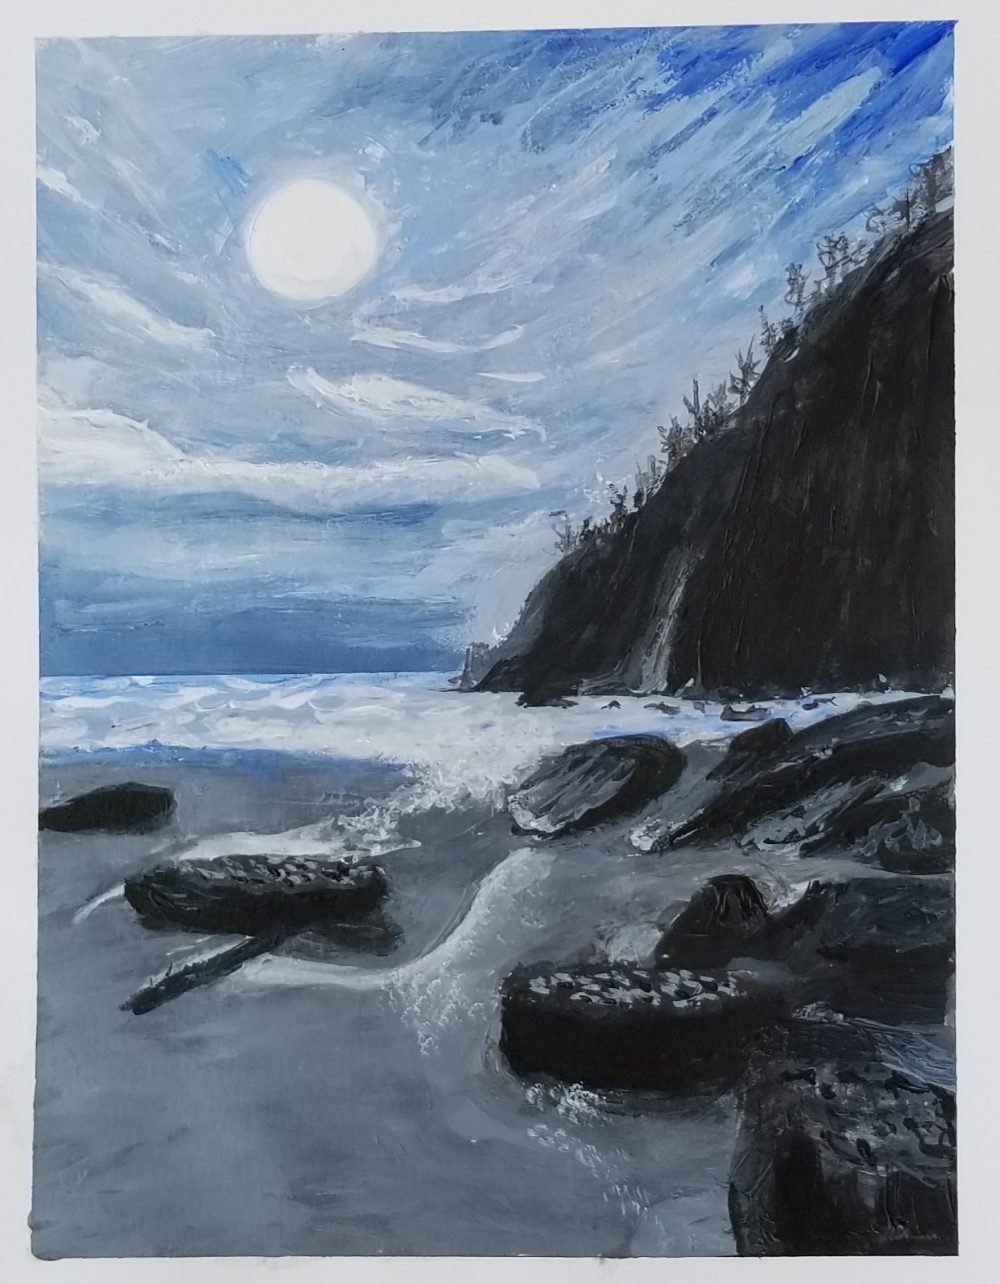 Monochromatic scene (blue) of an ocean beach scene showing rocks, water, a cliff in the background with a waterfall on the side, and a bright sun in a cloud filled sky.